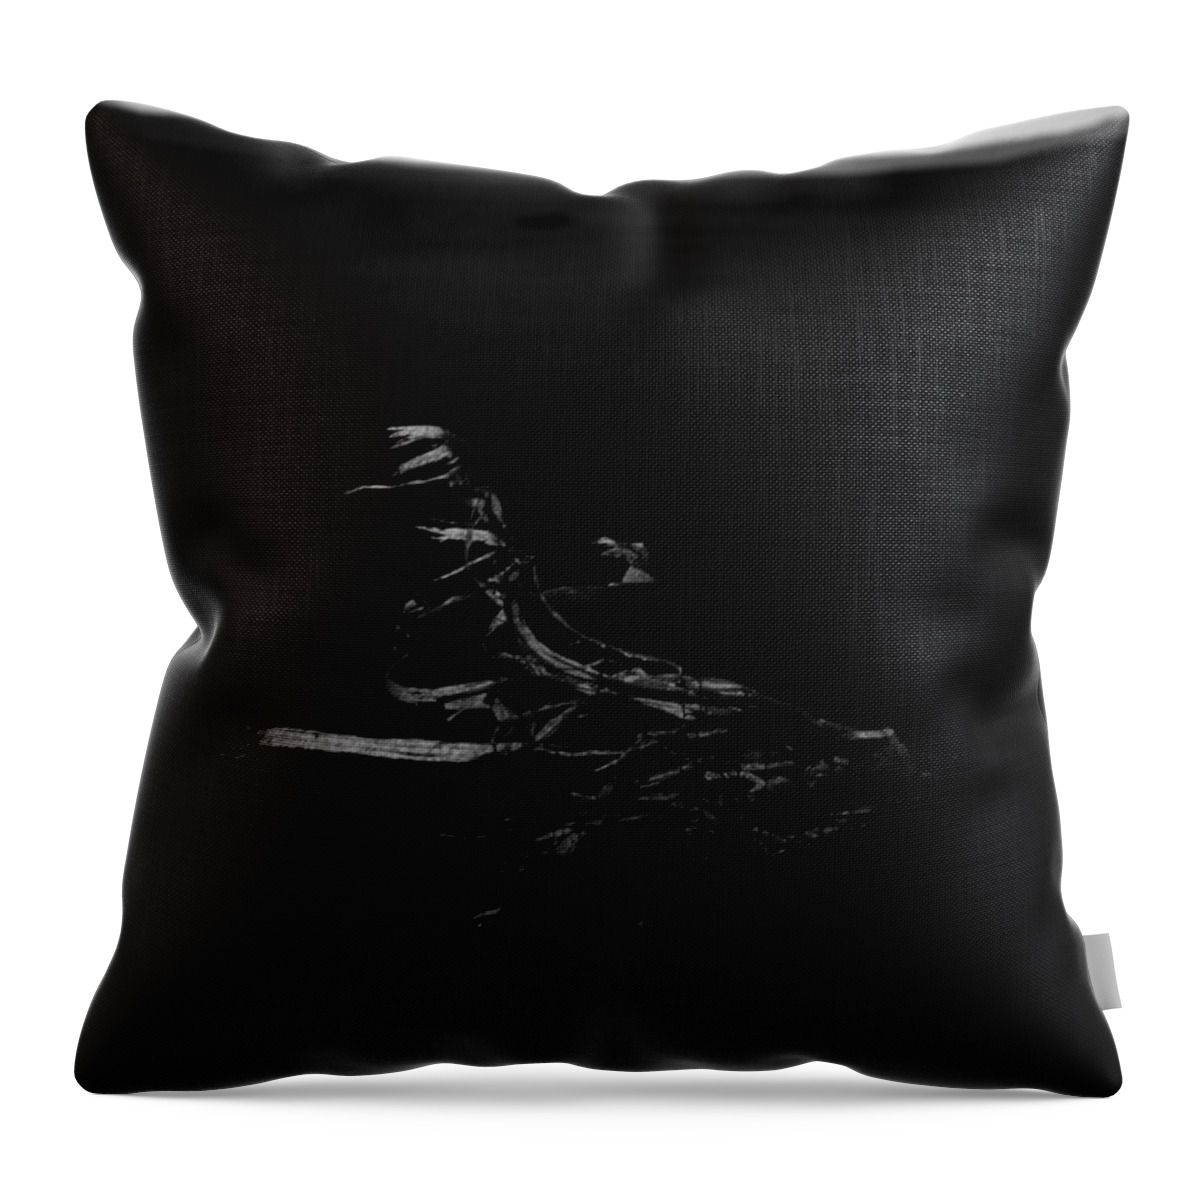 2015 Throw Pillow featuring the photograph blow away England by Jez C Self